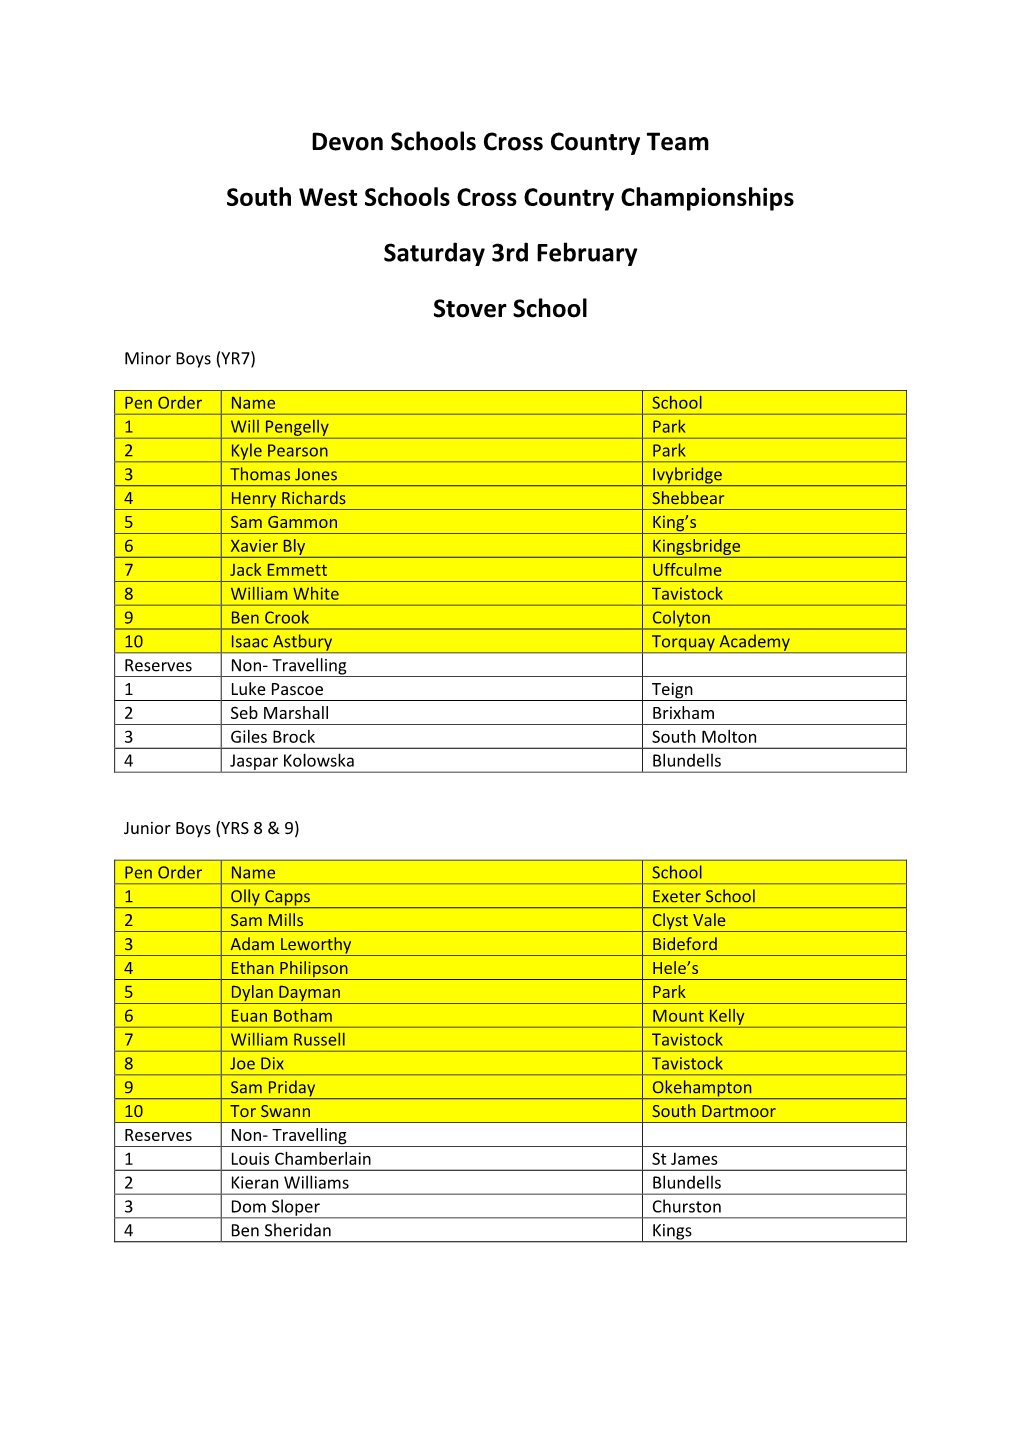 Devon Schools Cross Country Team South West Schools Cross Country Championships Saturday 3Rd February Stover School